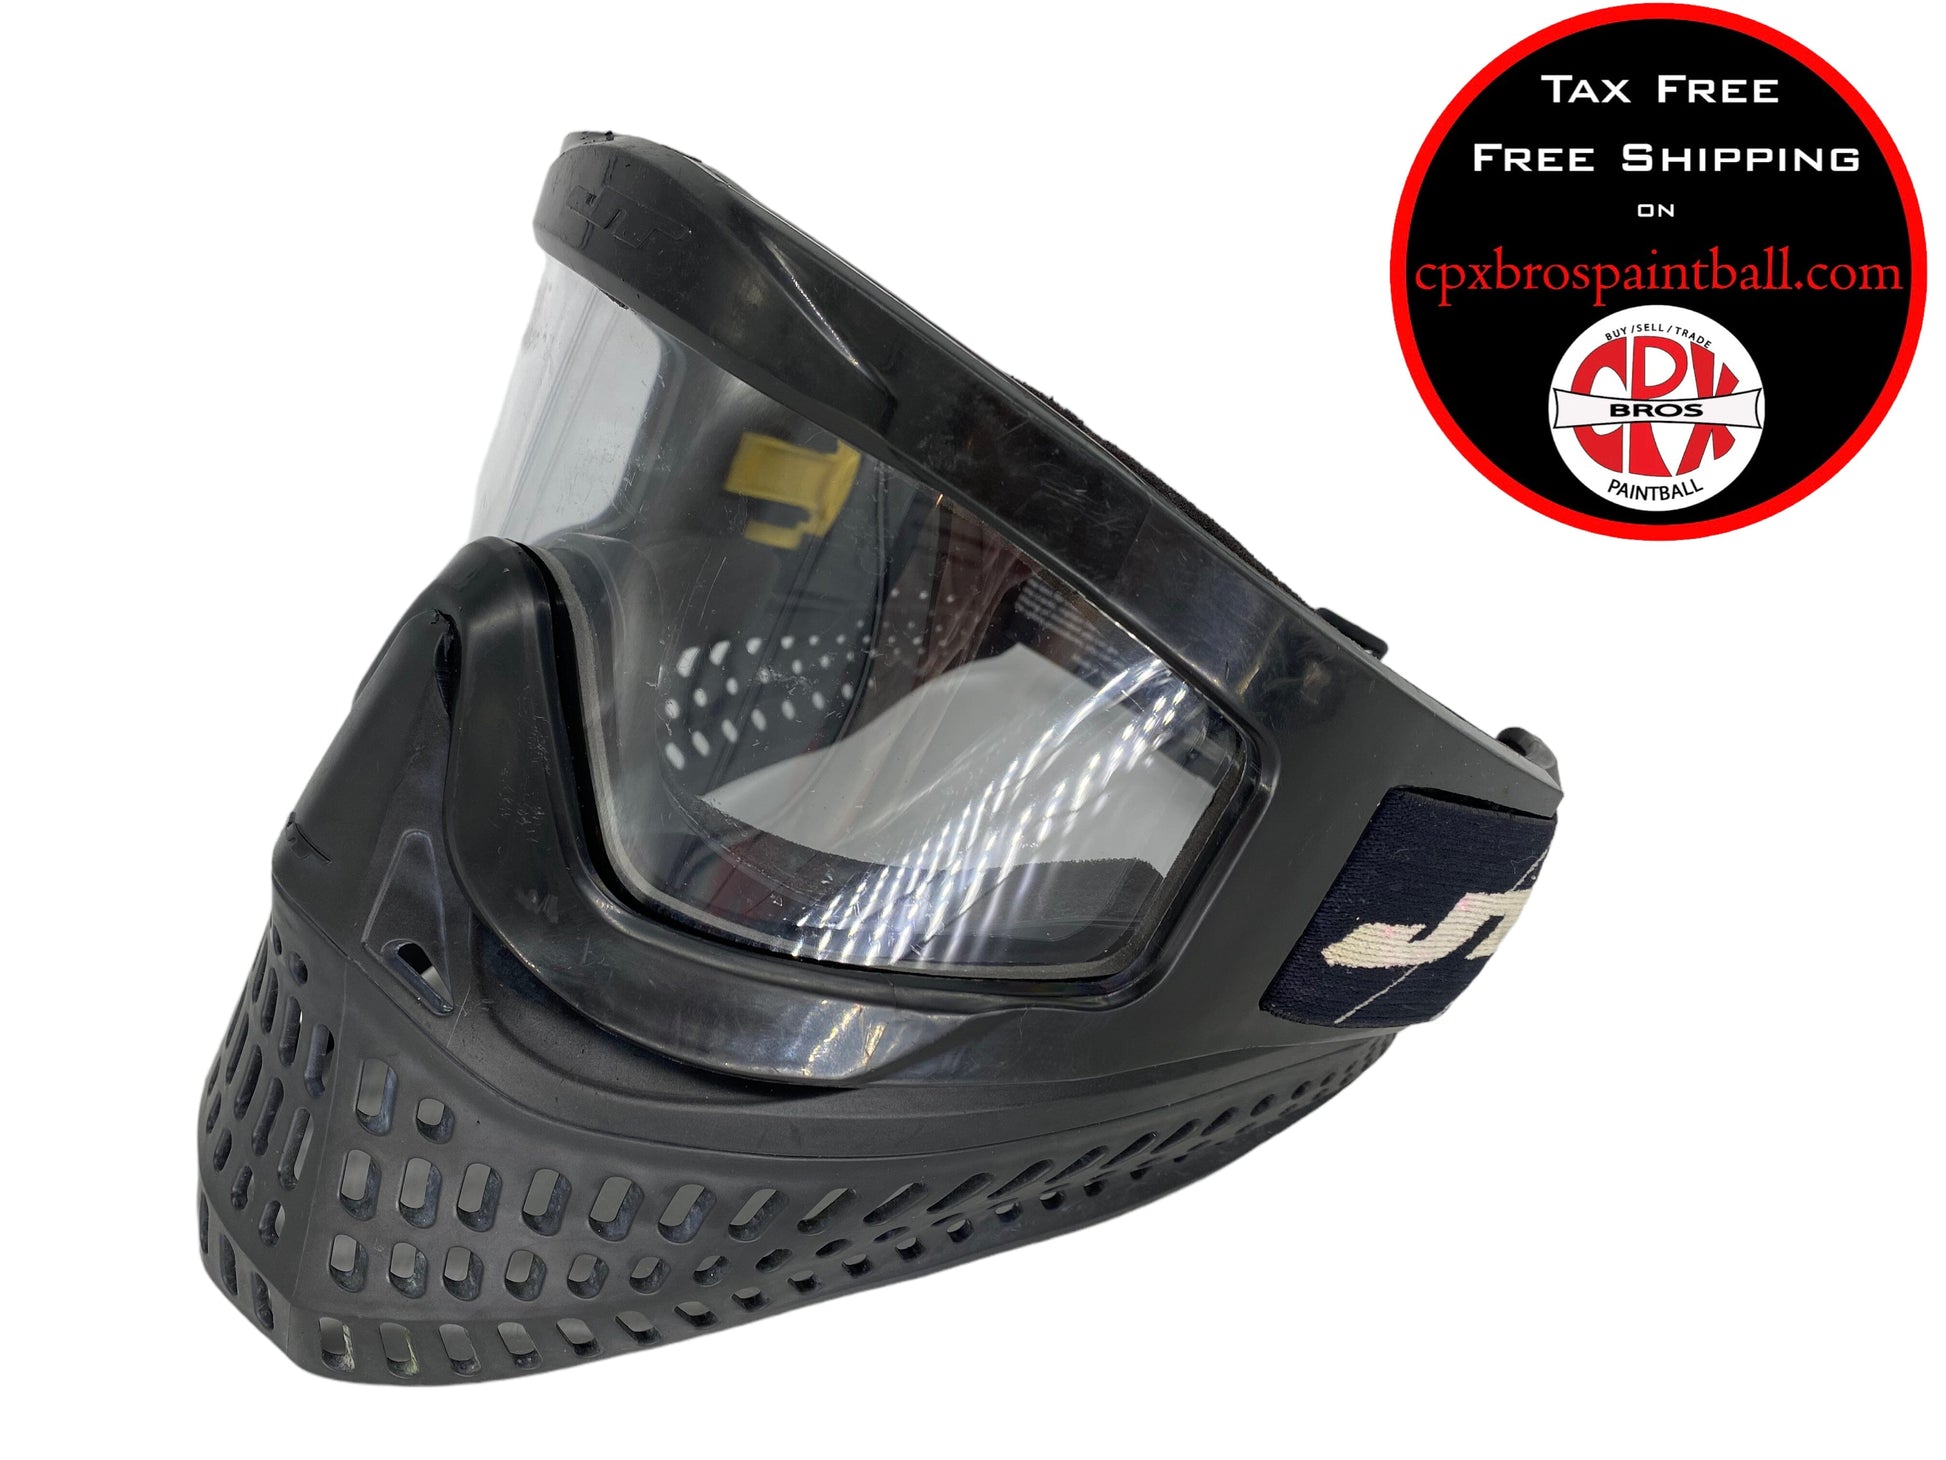 Used Jt Proflex X Mask Goggles Paintball Gun from CPXBrosPaintball Buy/Sell/Trade Paintball Markers, Paintball Hoppers, Paintball Masks, and Hormesis Headbands